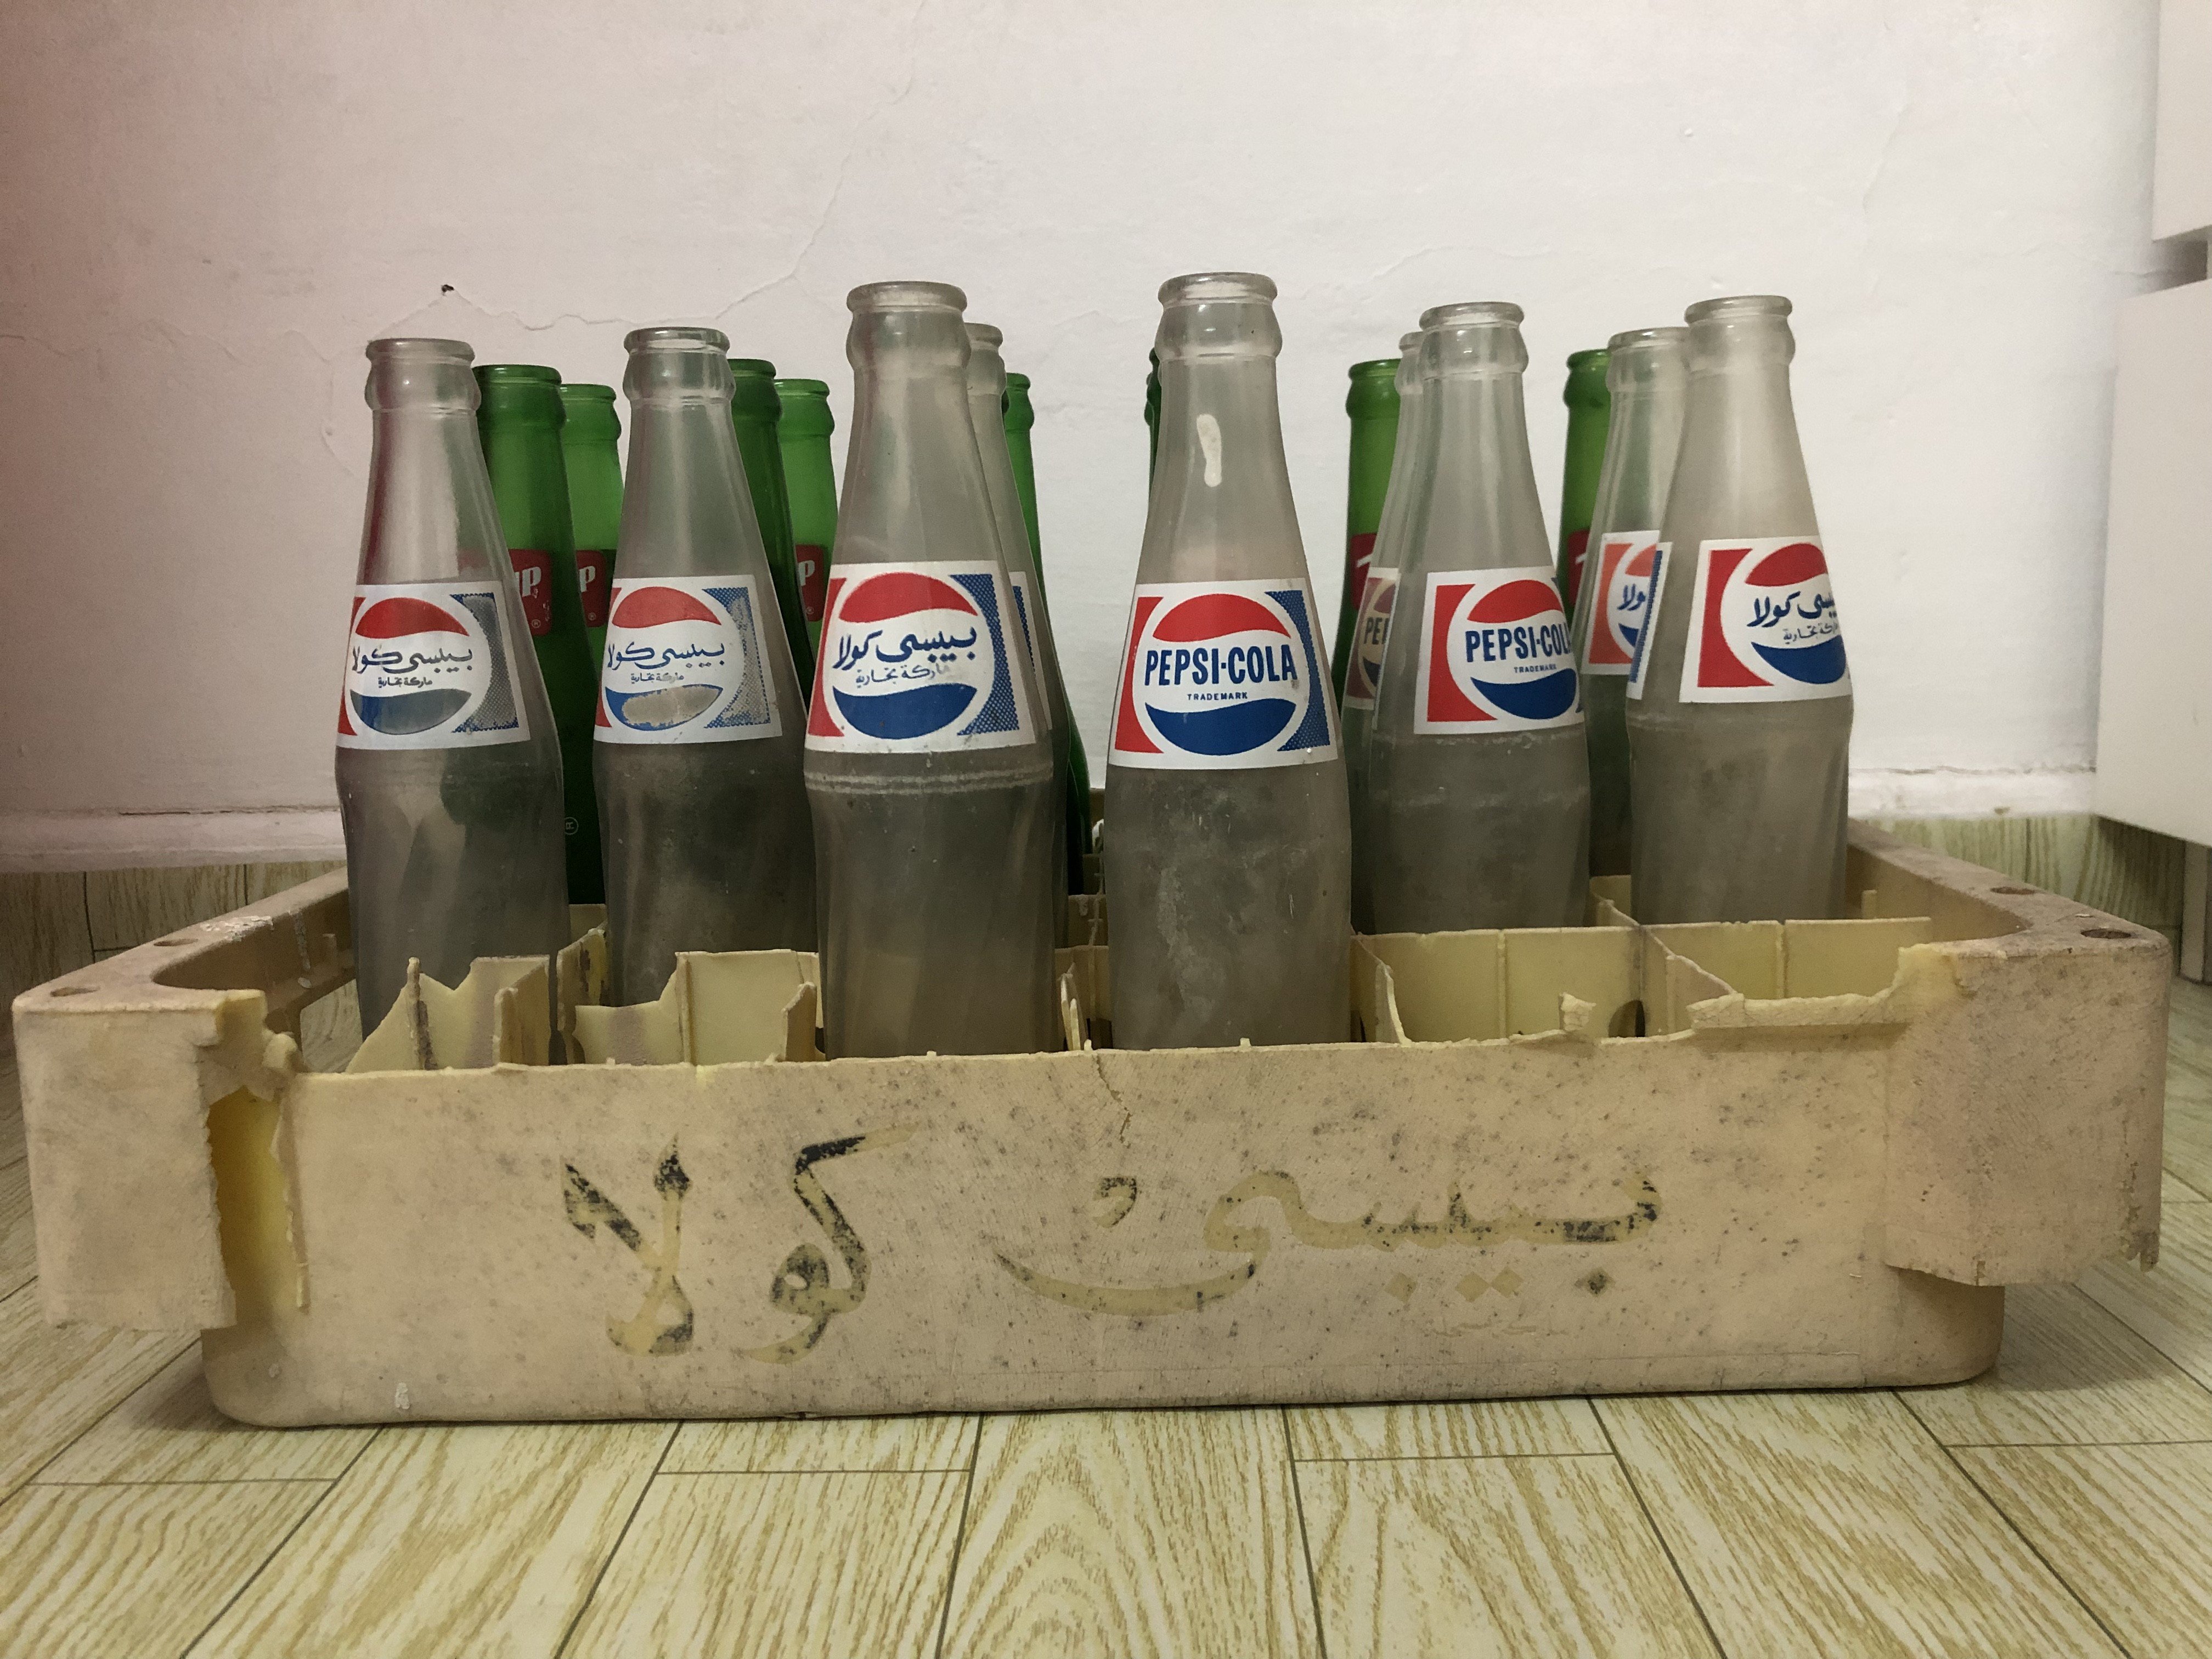 Pepsi and 7UP Bottles Arabic